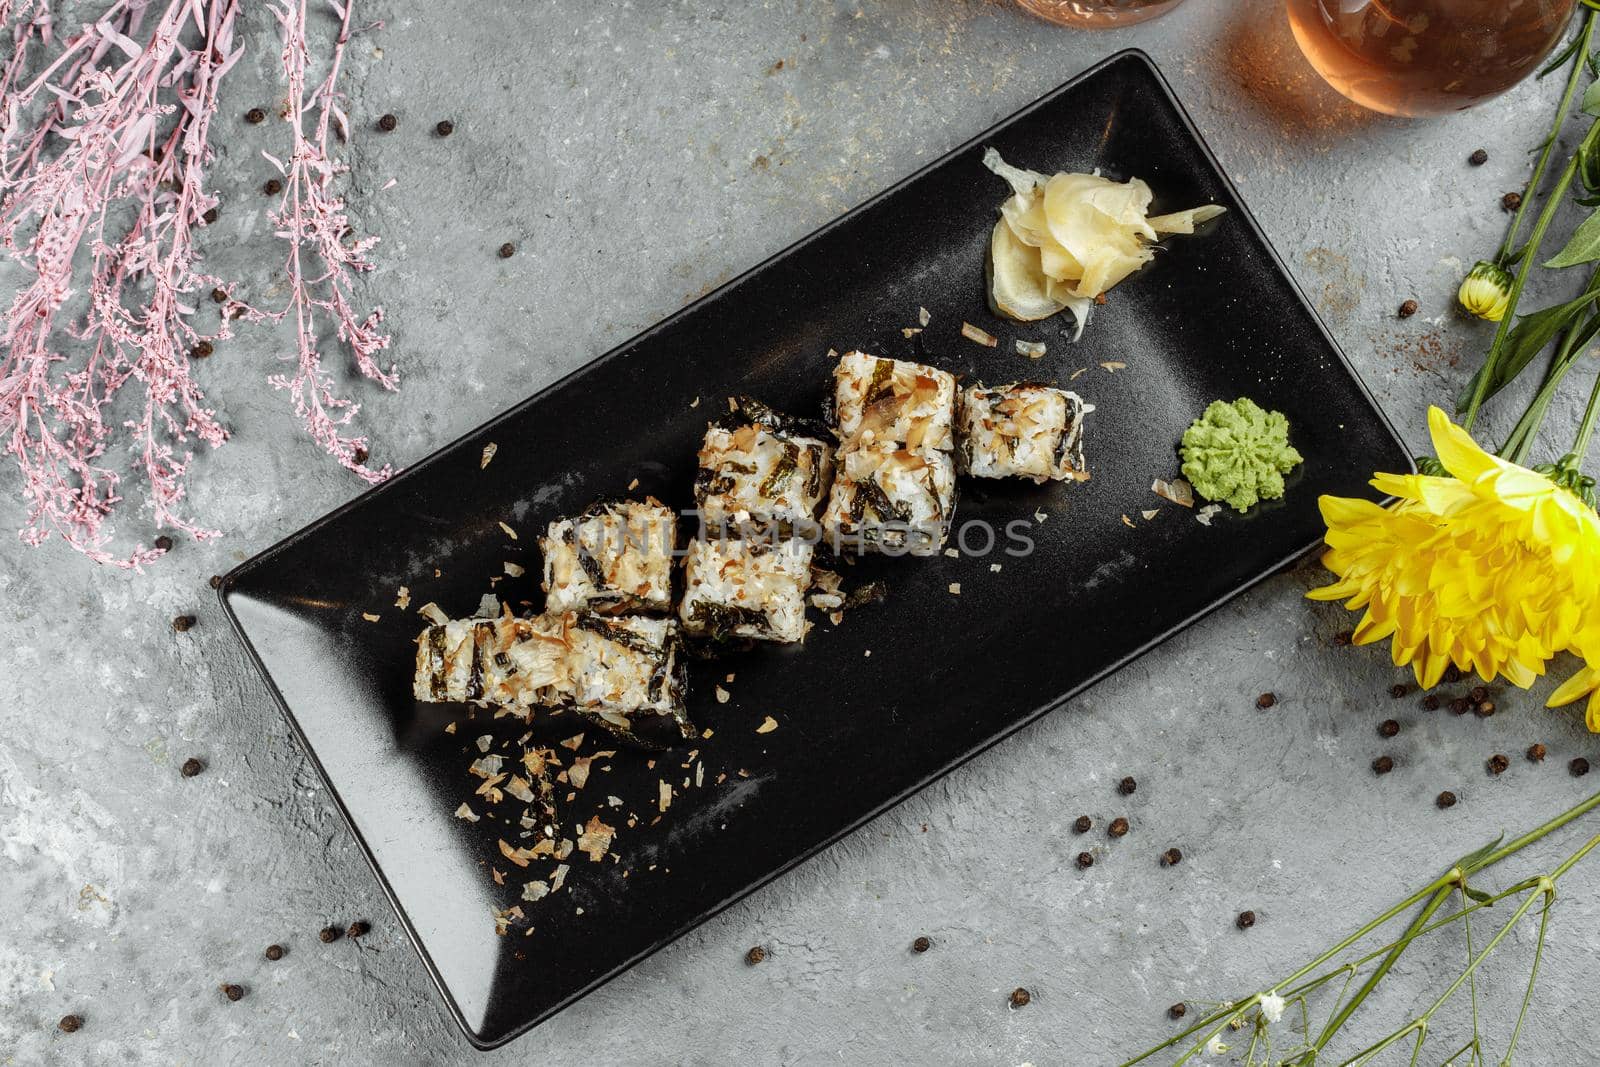 Golden dragon sushi roll with tuna, eel, cucumber, sesame seeds and tobiko caviar on wood background by UcheaD